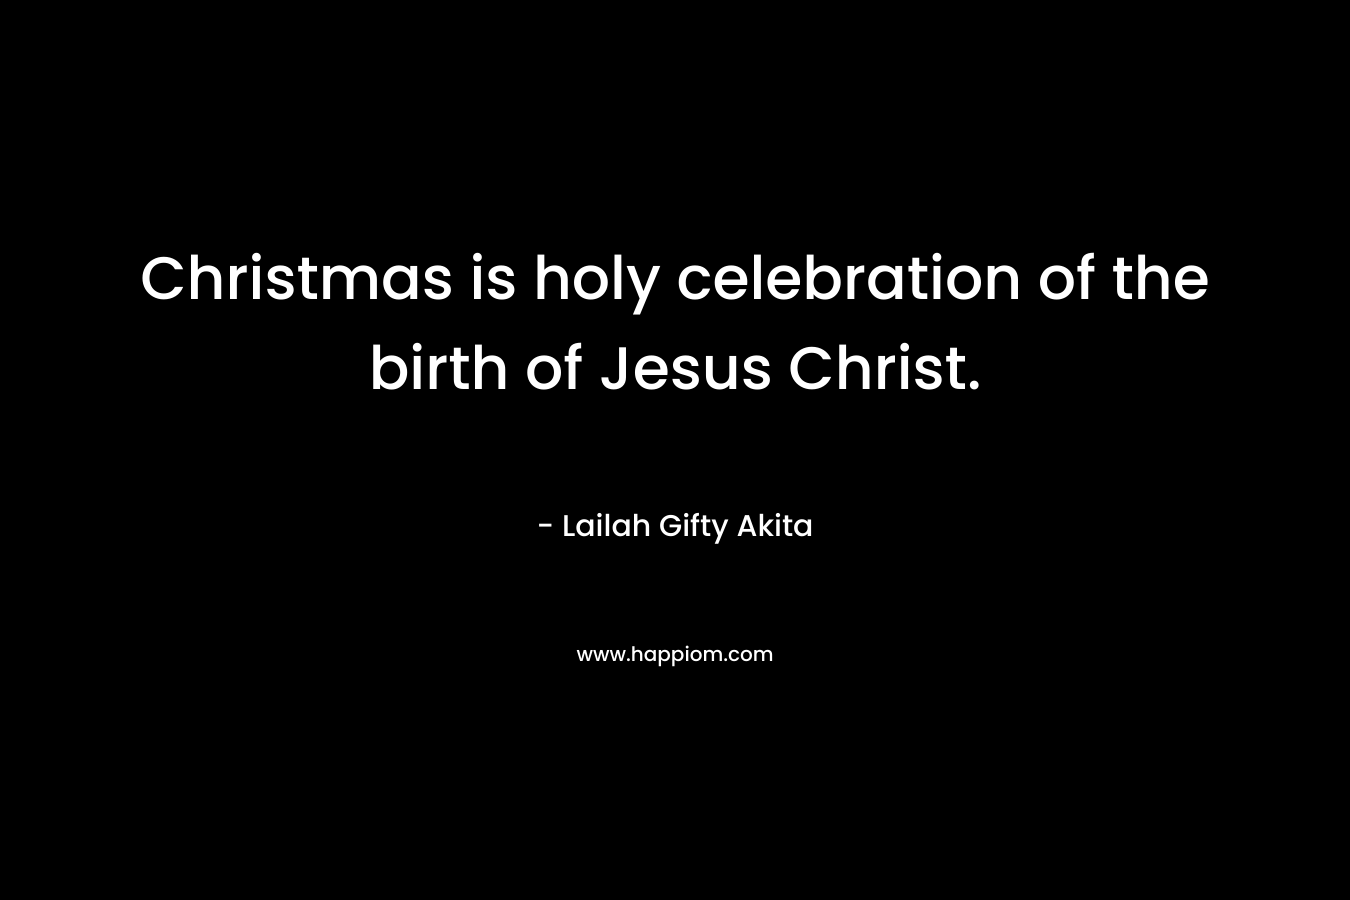 Christmas is holy celebration of the birth of Jesus Christ. – Lailah Gifty Akita